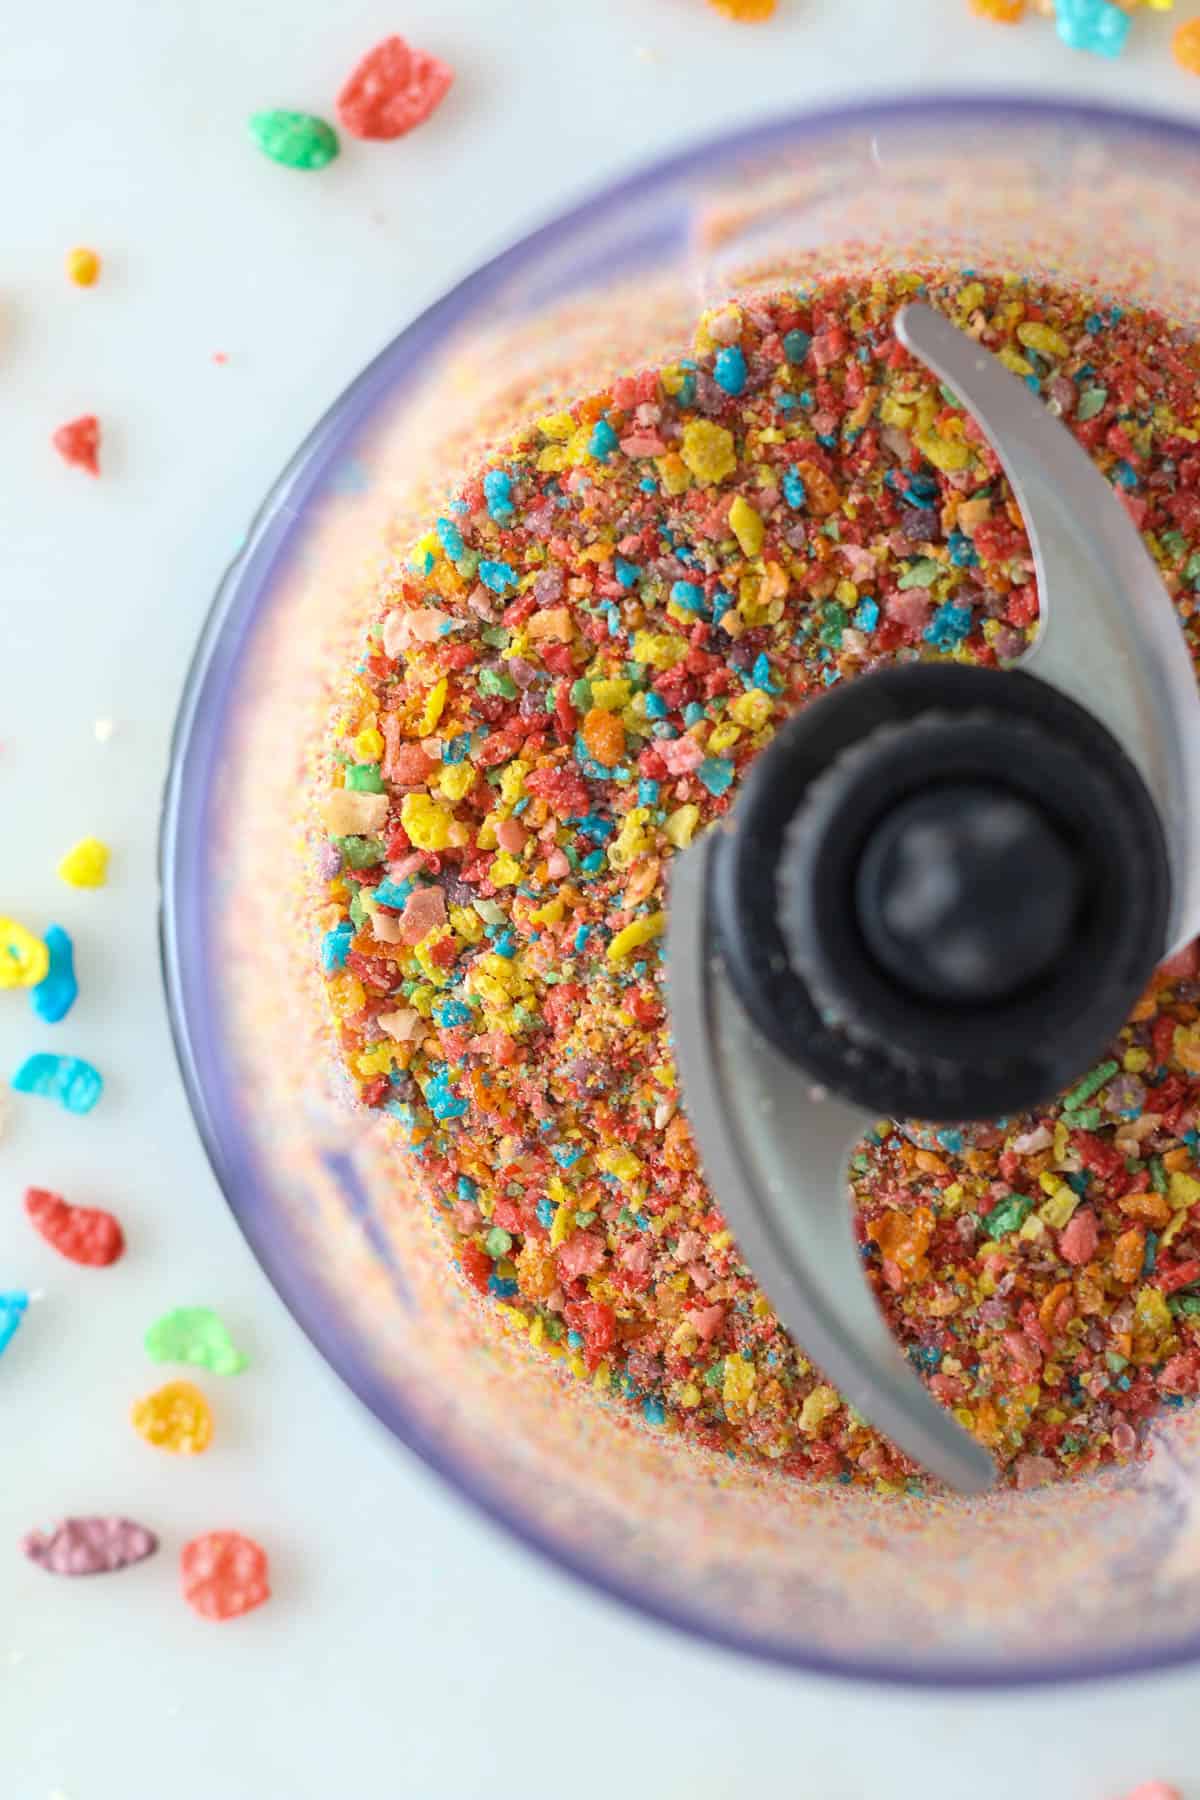 A food processor with ground up Fruity Pebble cereals